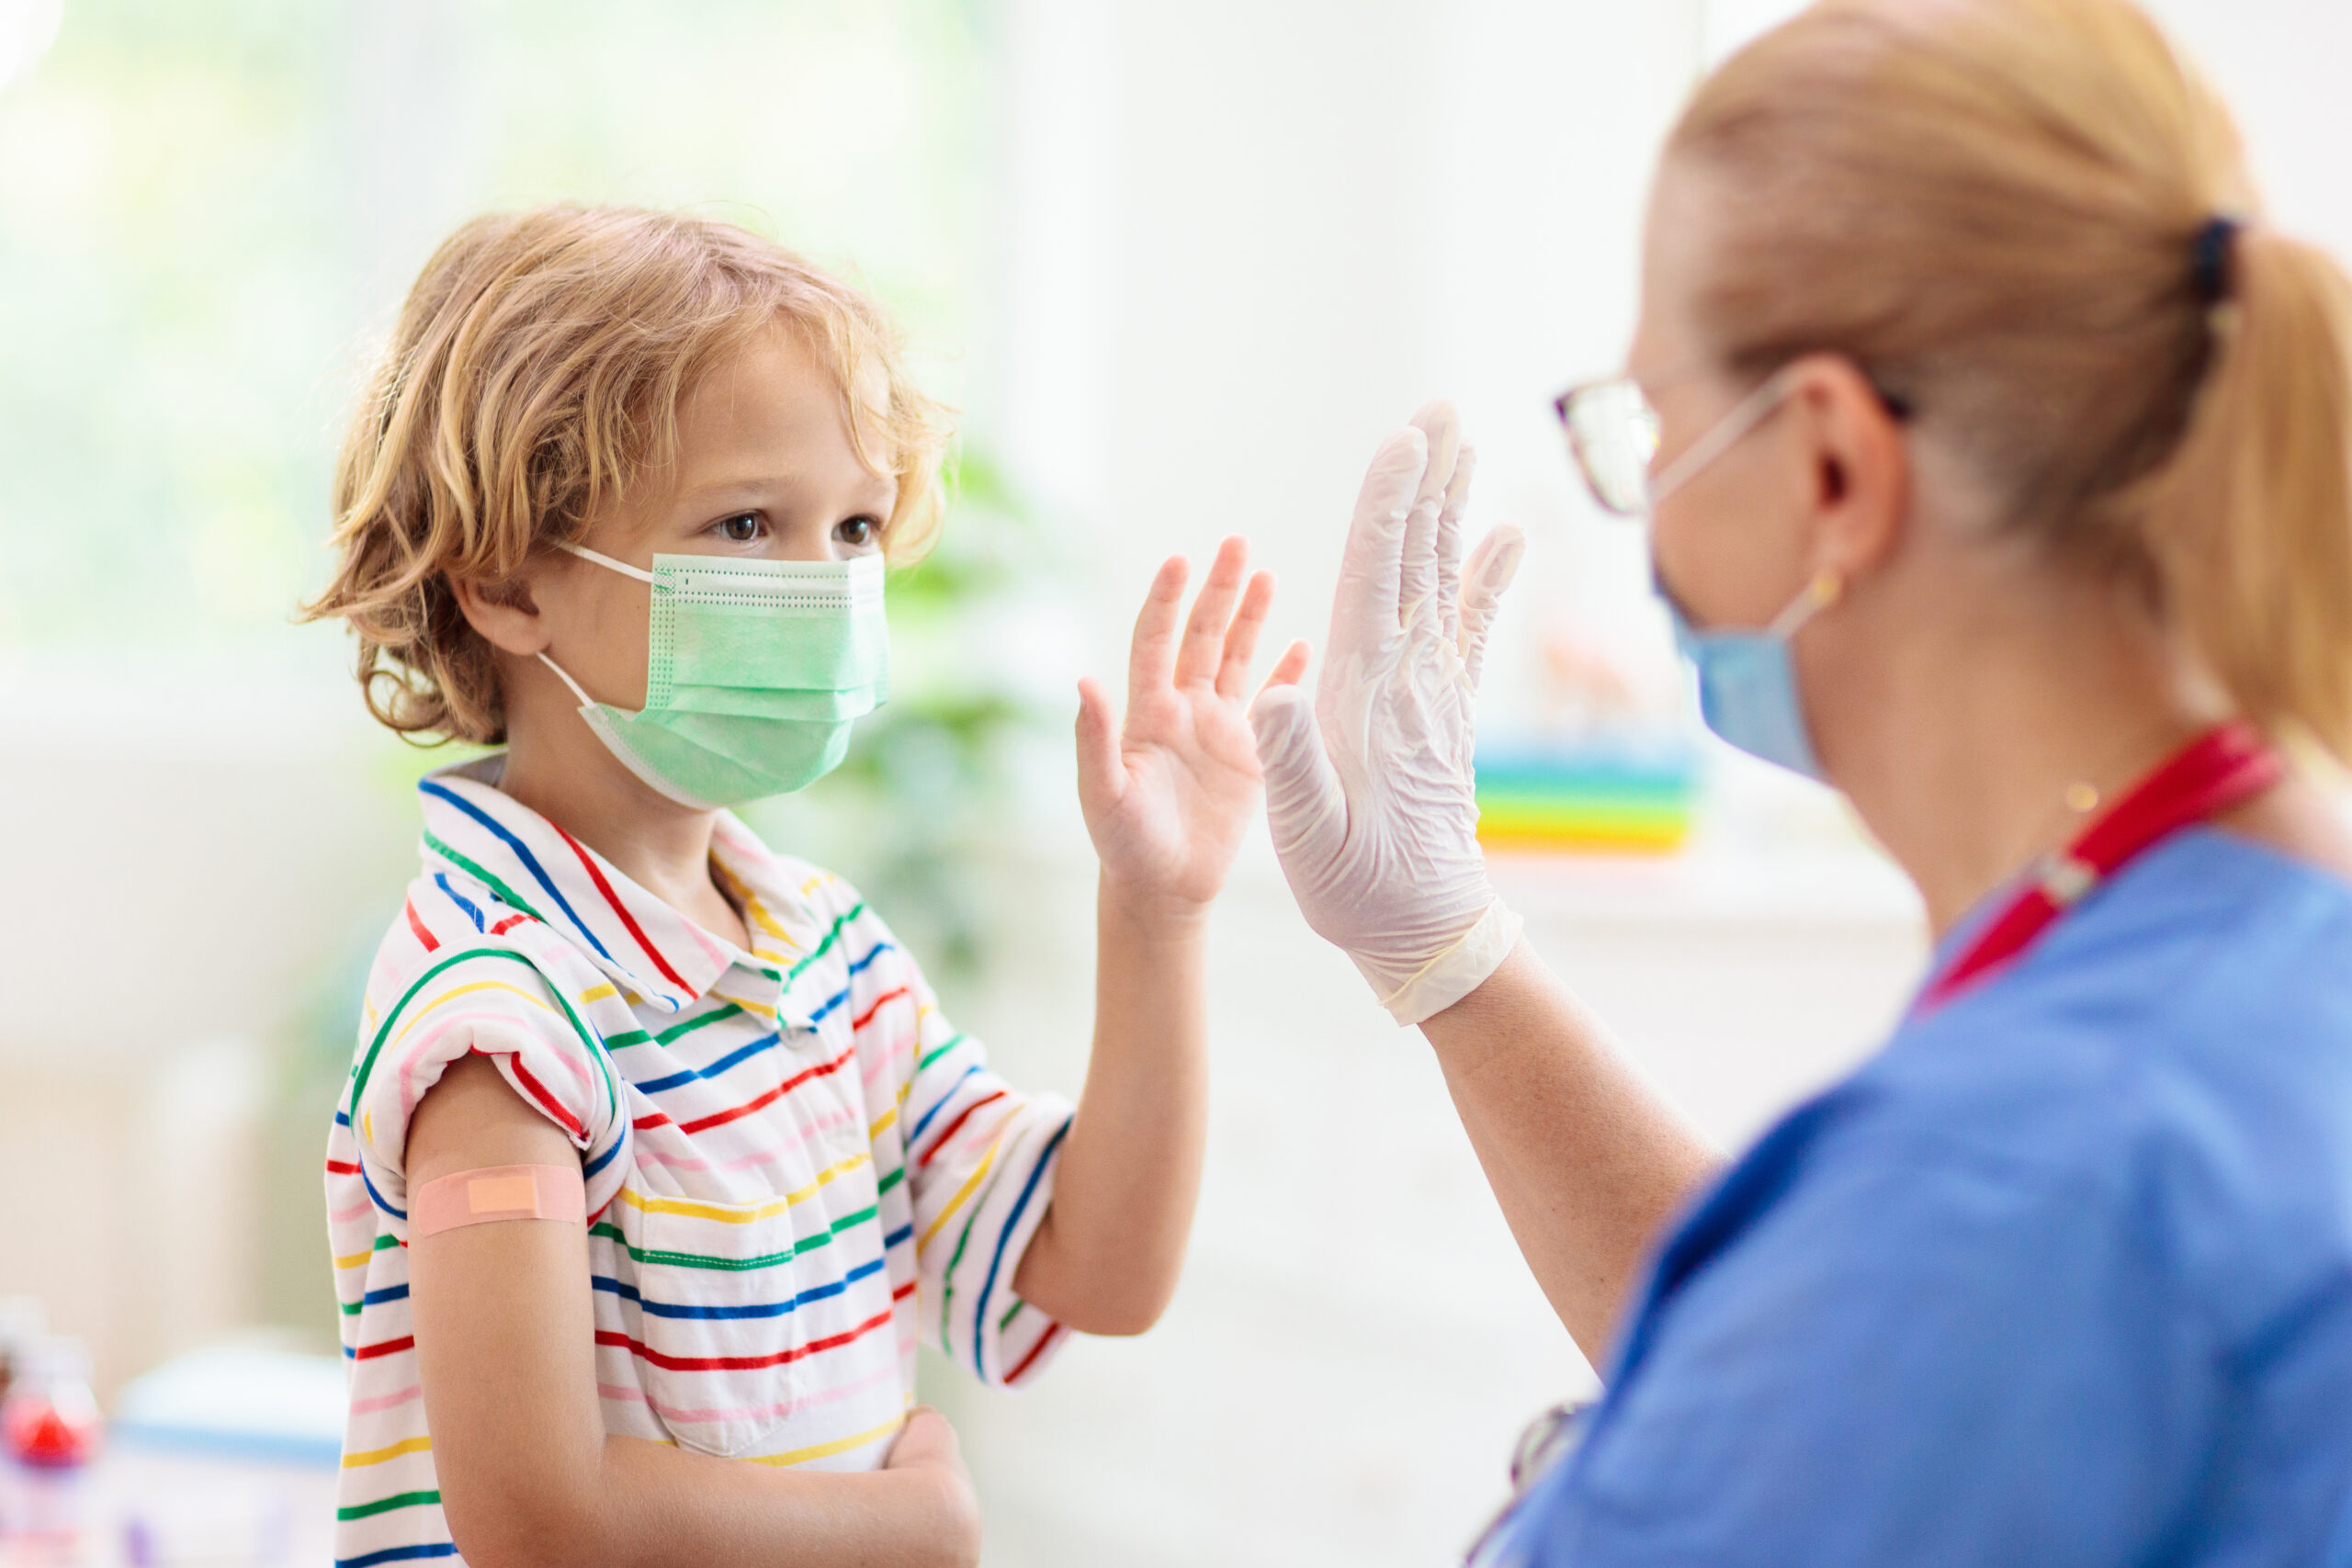 Young child with a mask on gives nurse a high five after receiving vaccine.